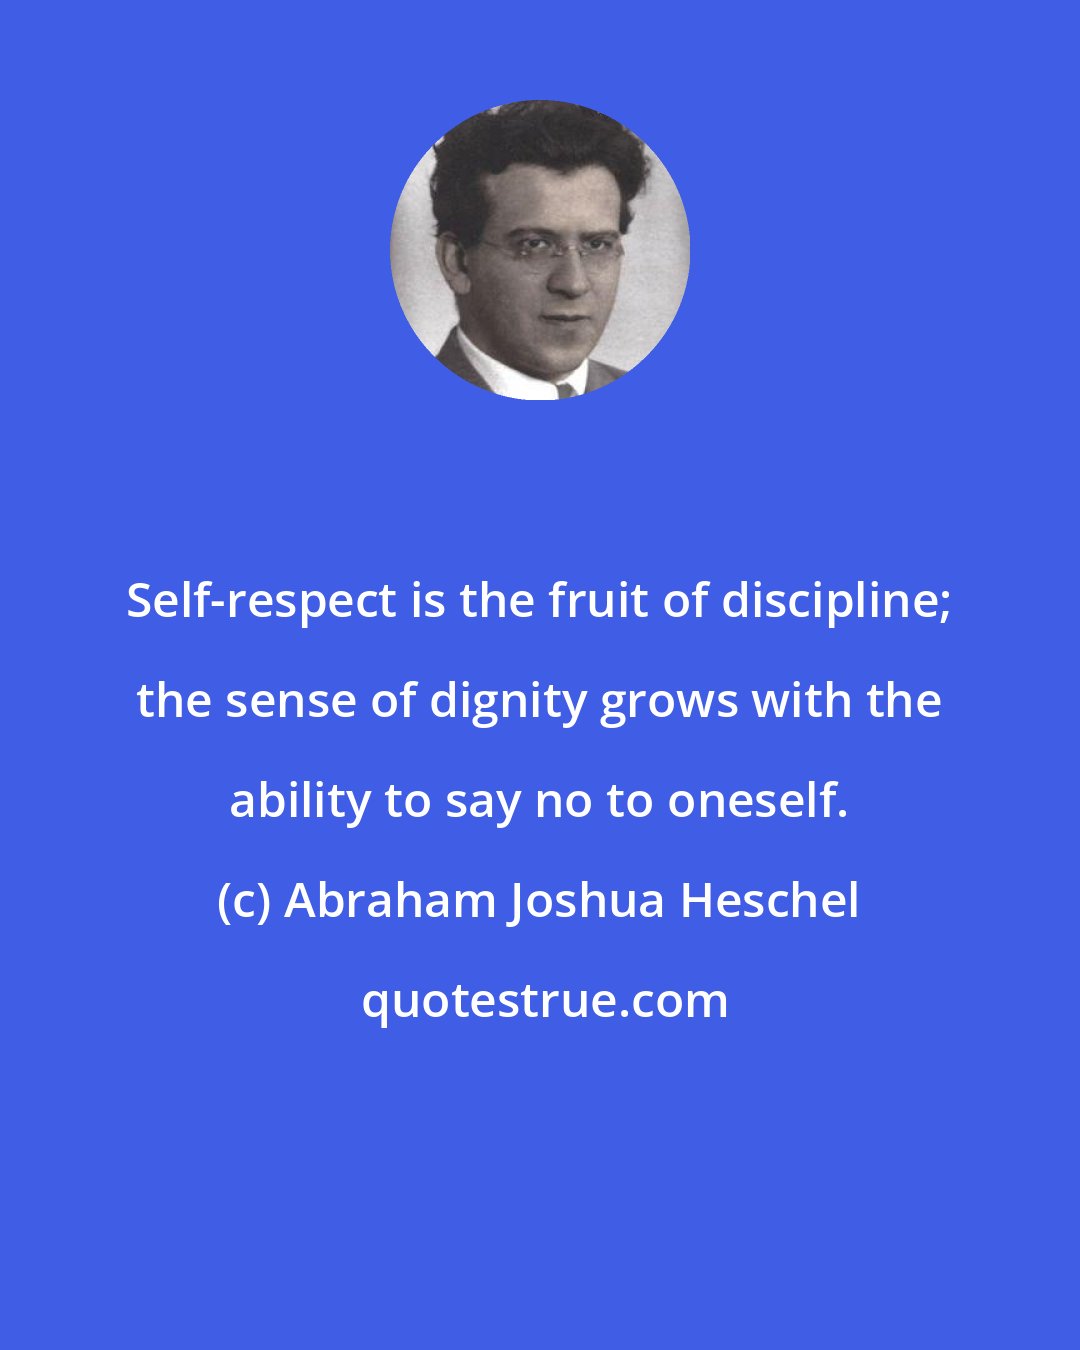 Abraham Joshua Heschel: Self-respect is the fruit of discipline; the sense of dignity grows with the ability to say no to oneself.